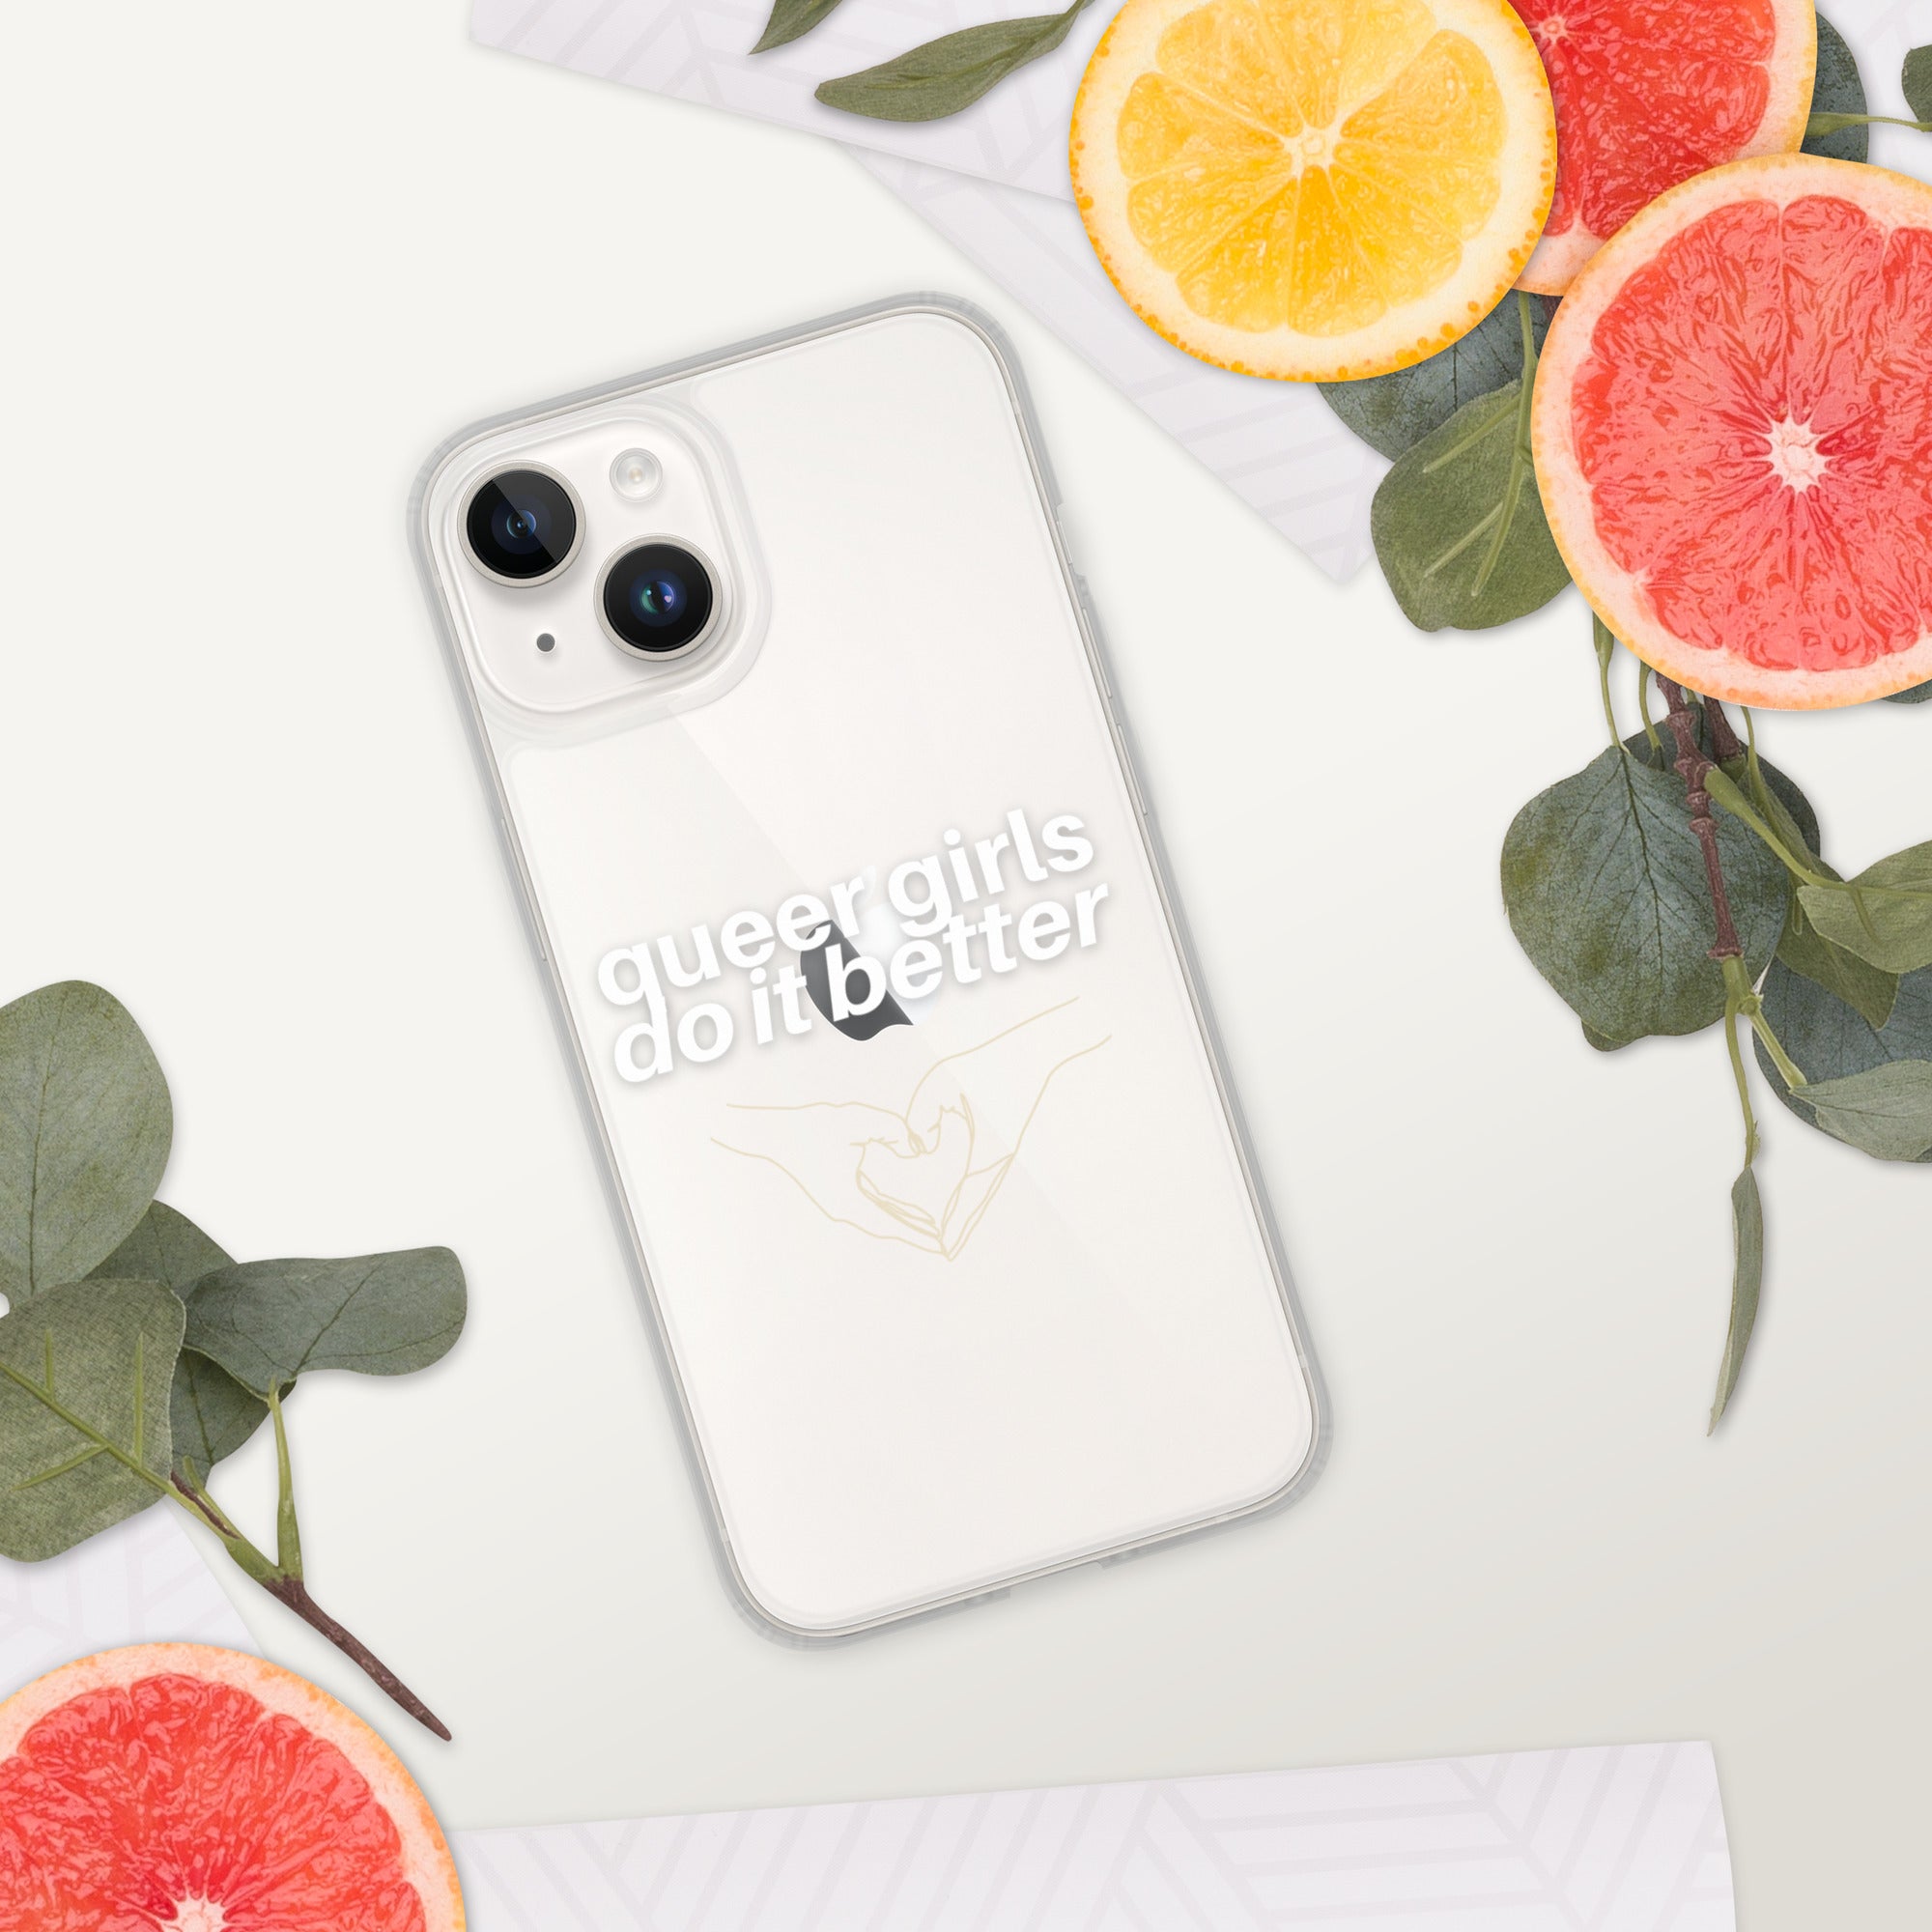 Queer Girls Do It Better Clear Case for iPhone®